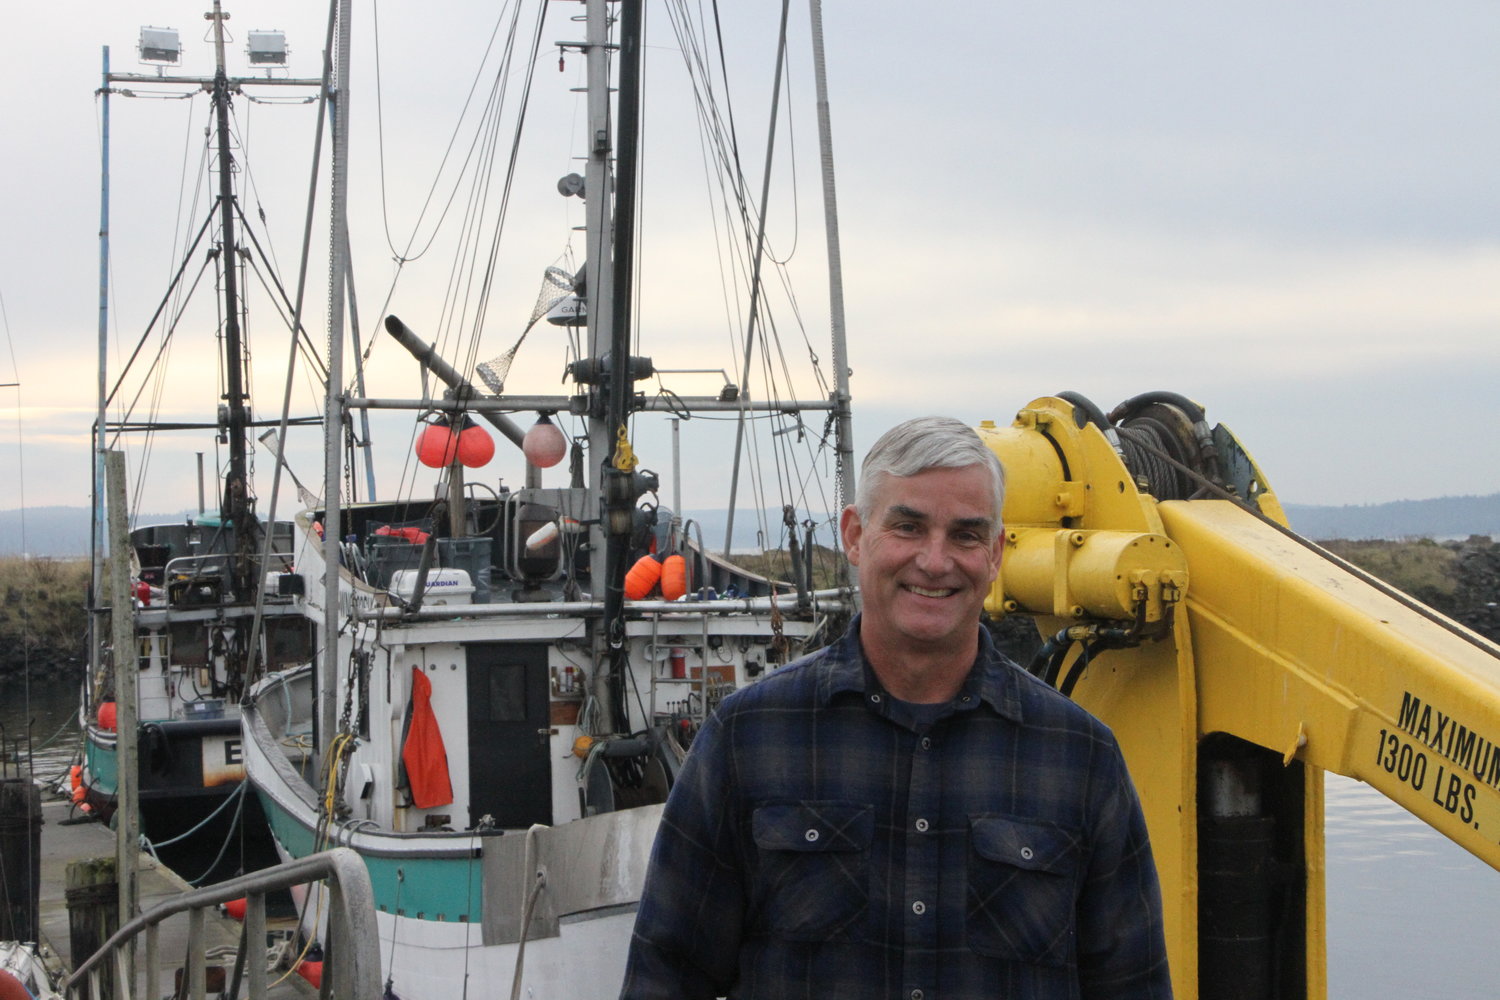 Scott Kimmel, owner of New Day Fisheries stands in front of his fishing boats, Adriatic and Ellie-J.